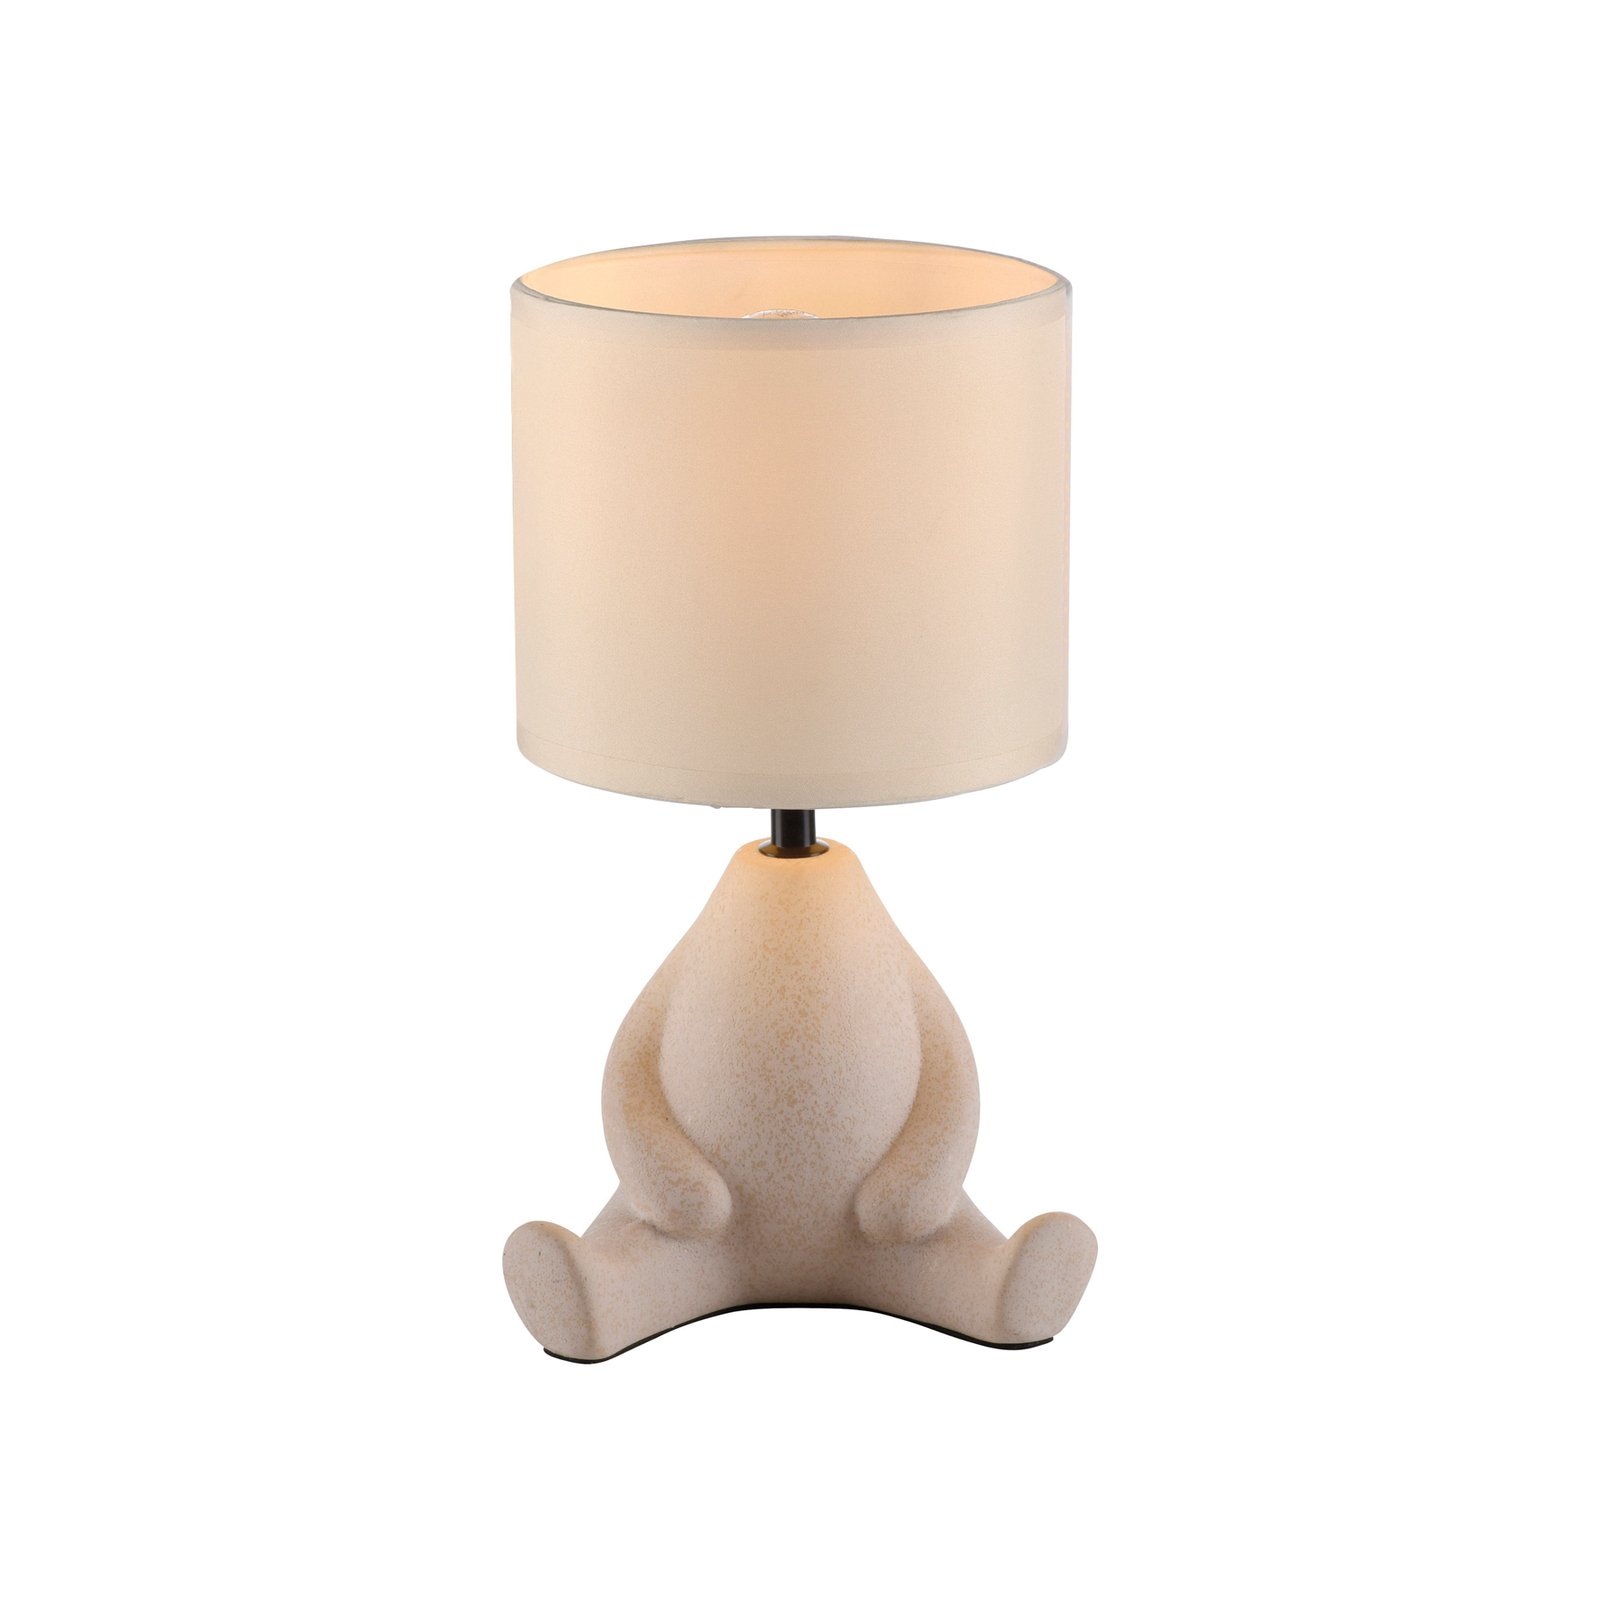 JUST LIGHT. Ted table lamp, ceramic, seated, sand beige